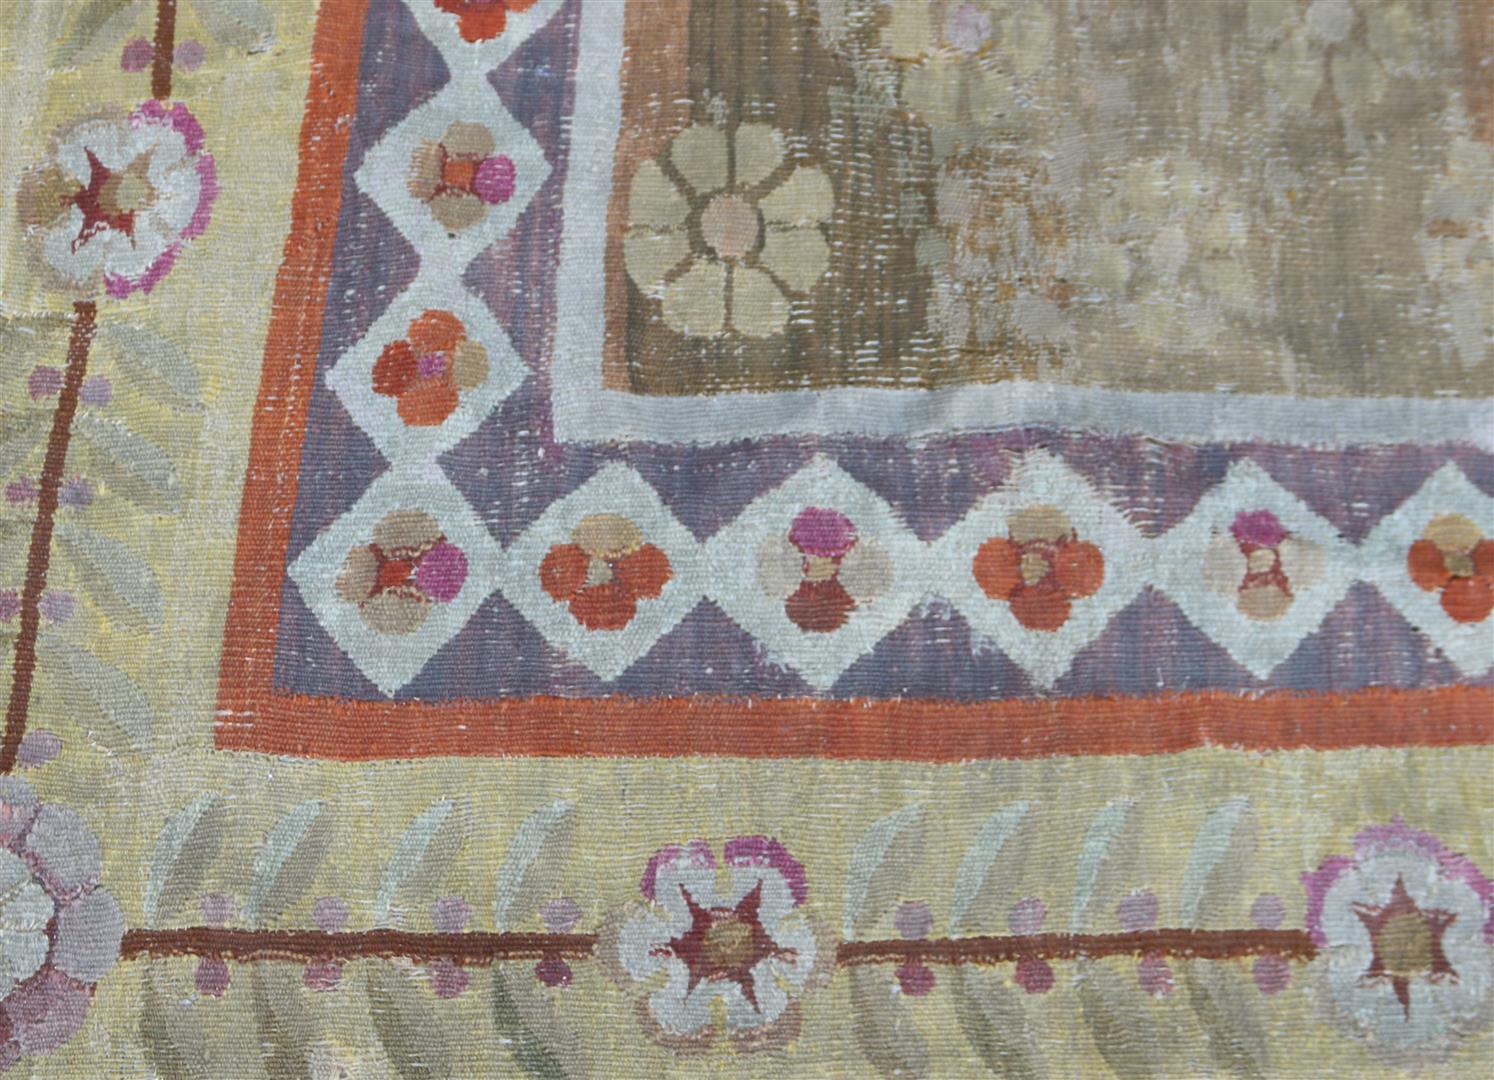 Antique woven tapestry - Image 2 of 10